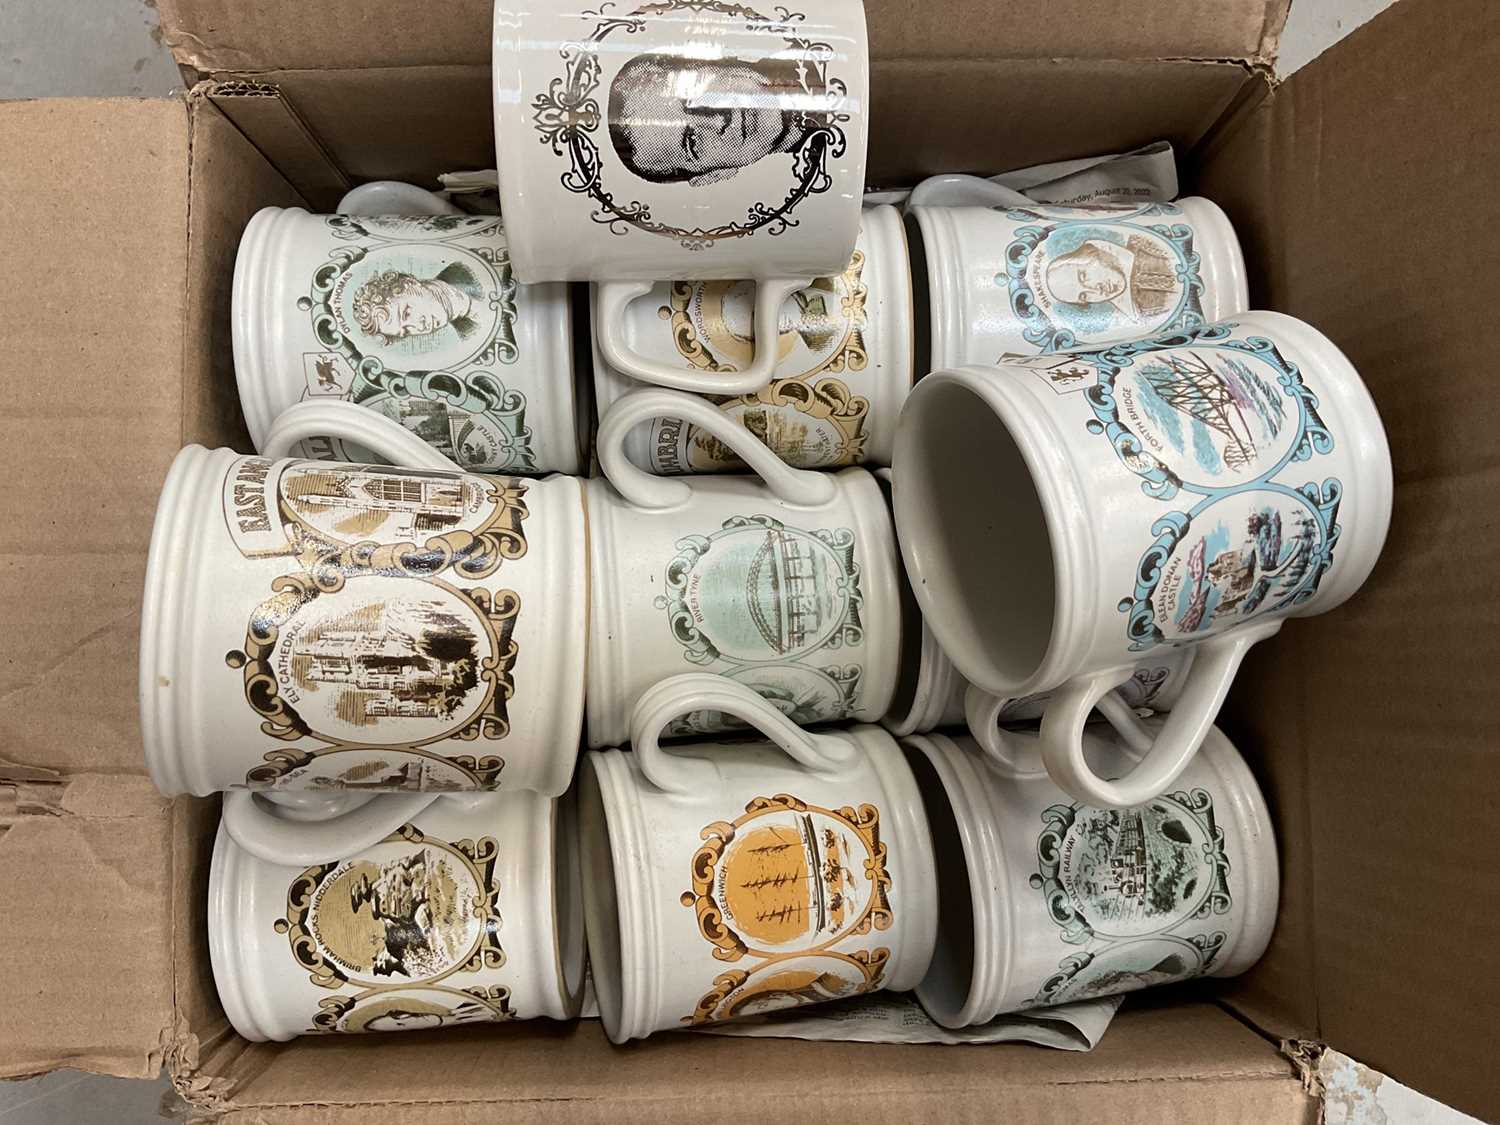 Collection of commemorative Derby mugs and other items